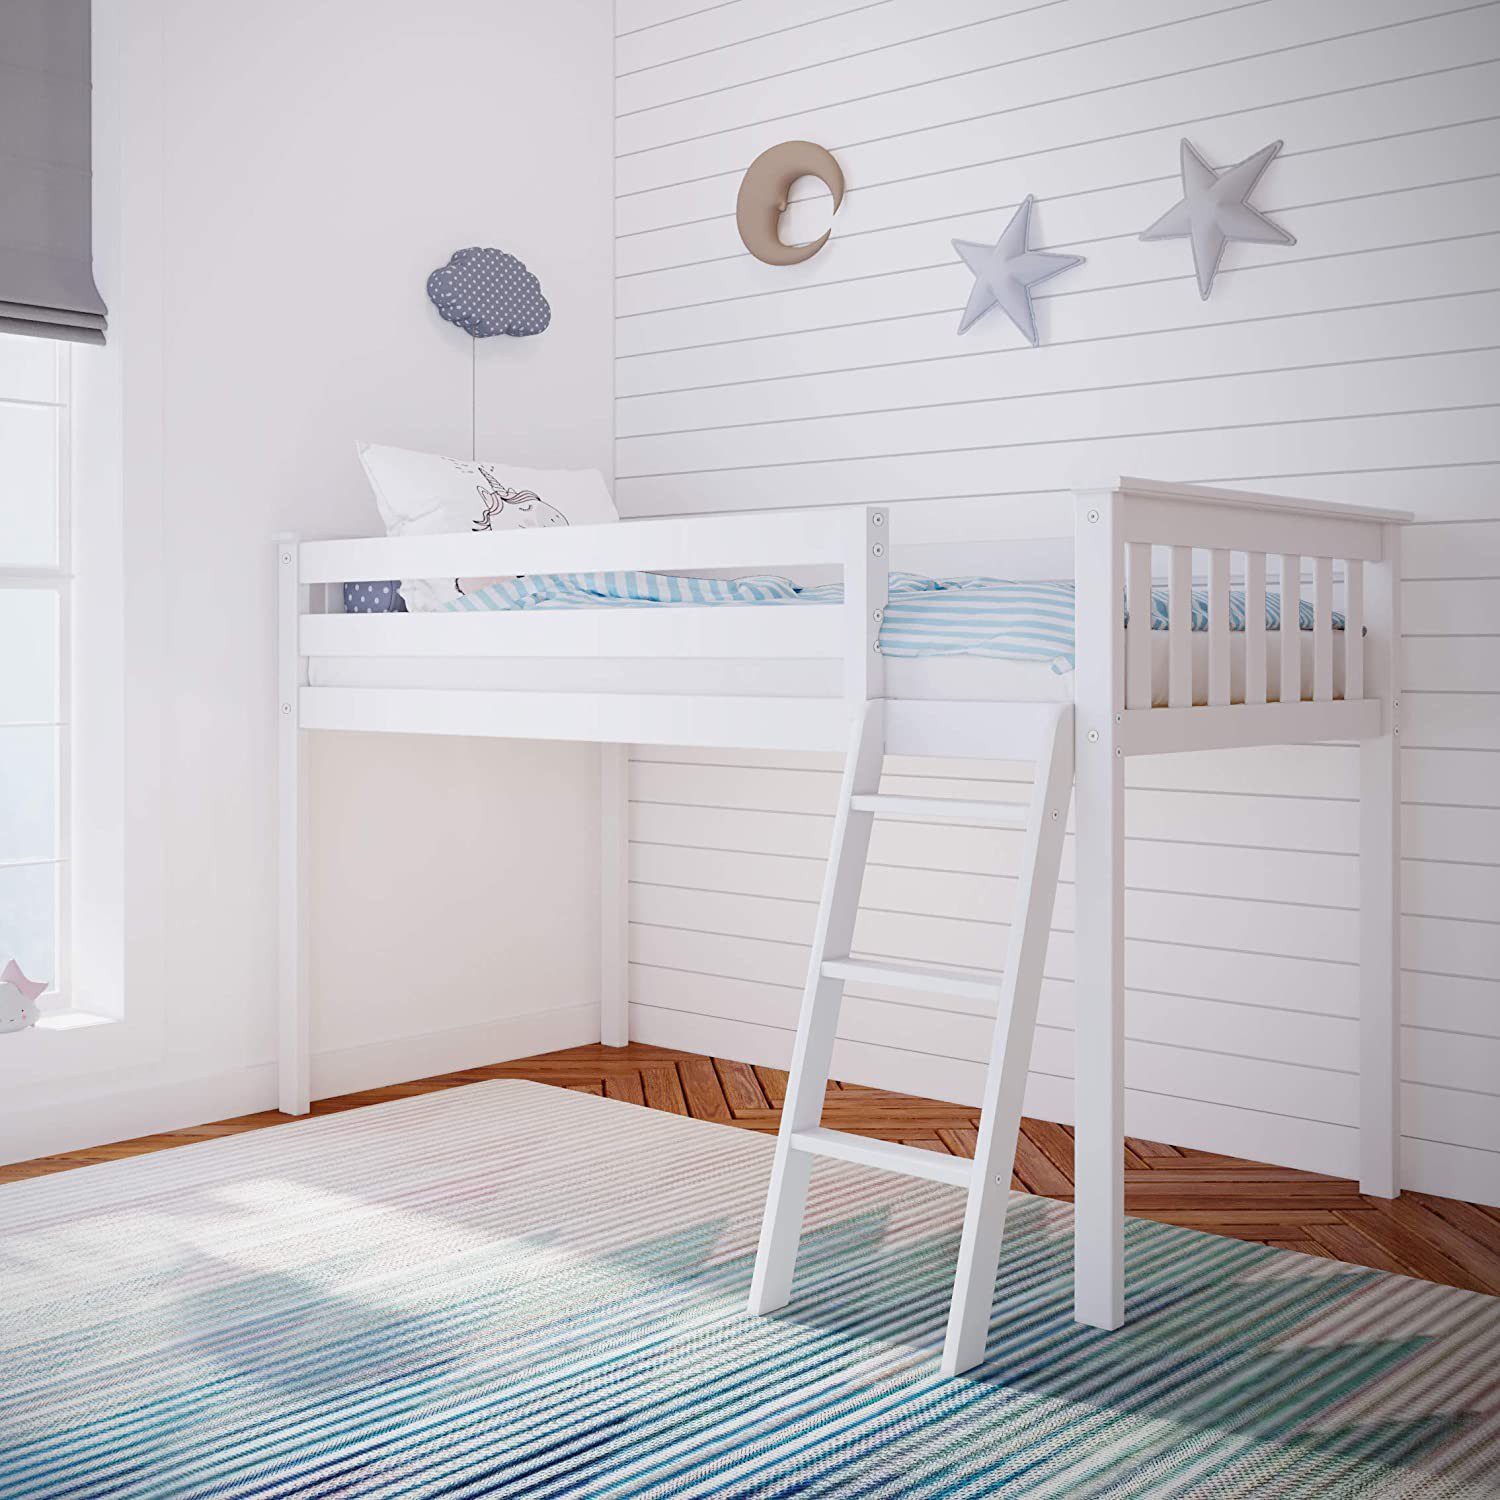 Max & Lily Solid Wood Twin-Size Low Loft Bed, White